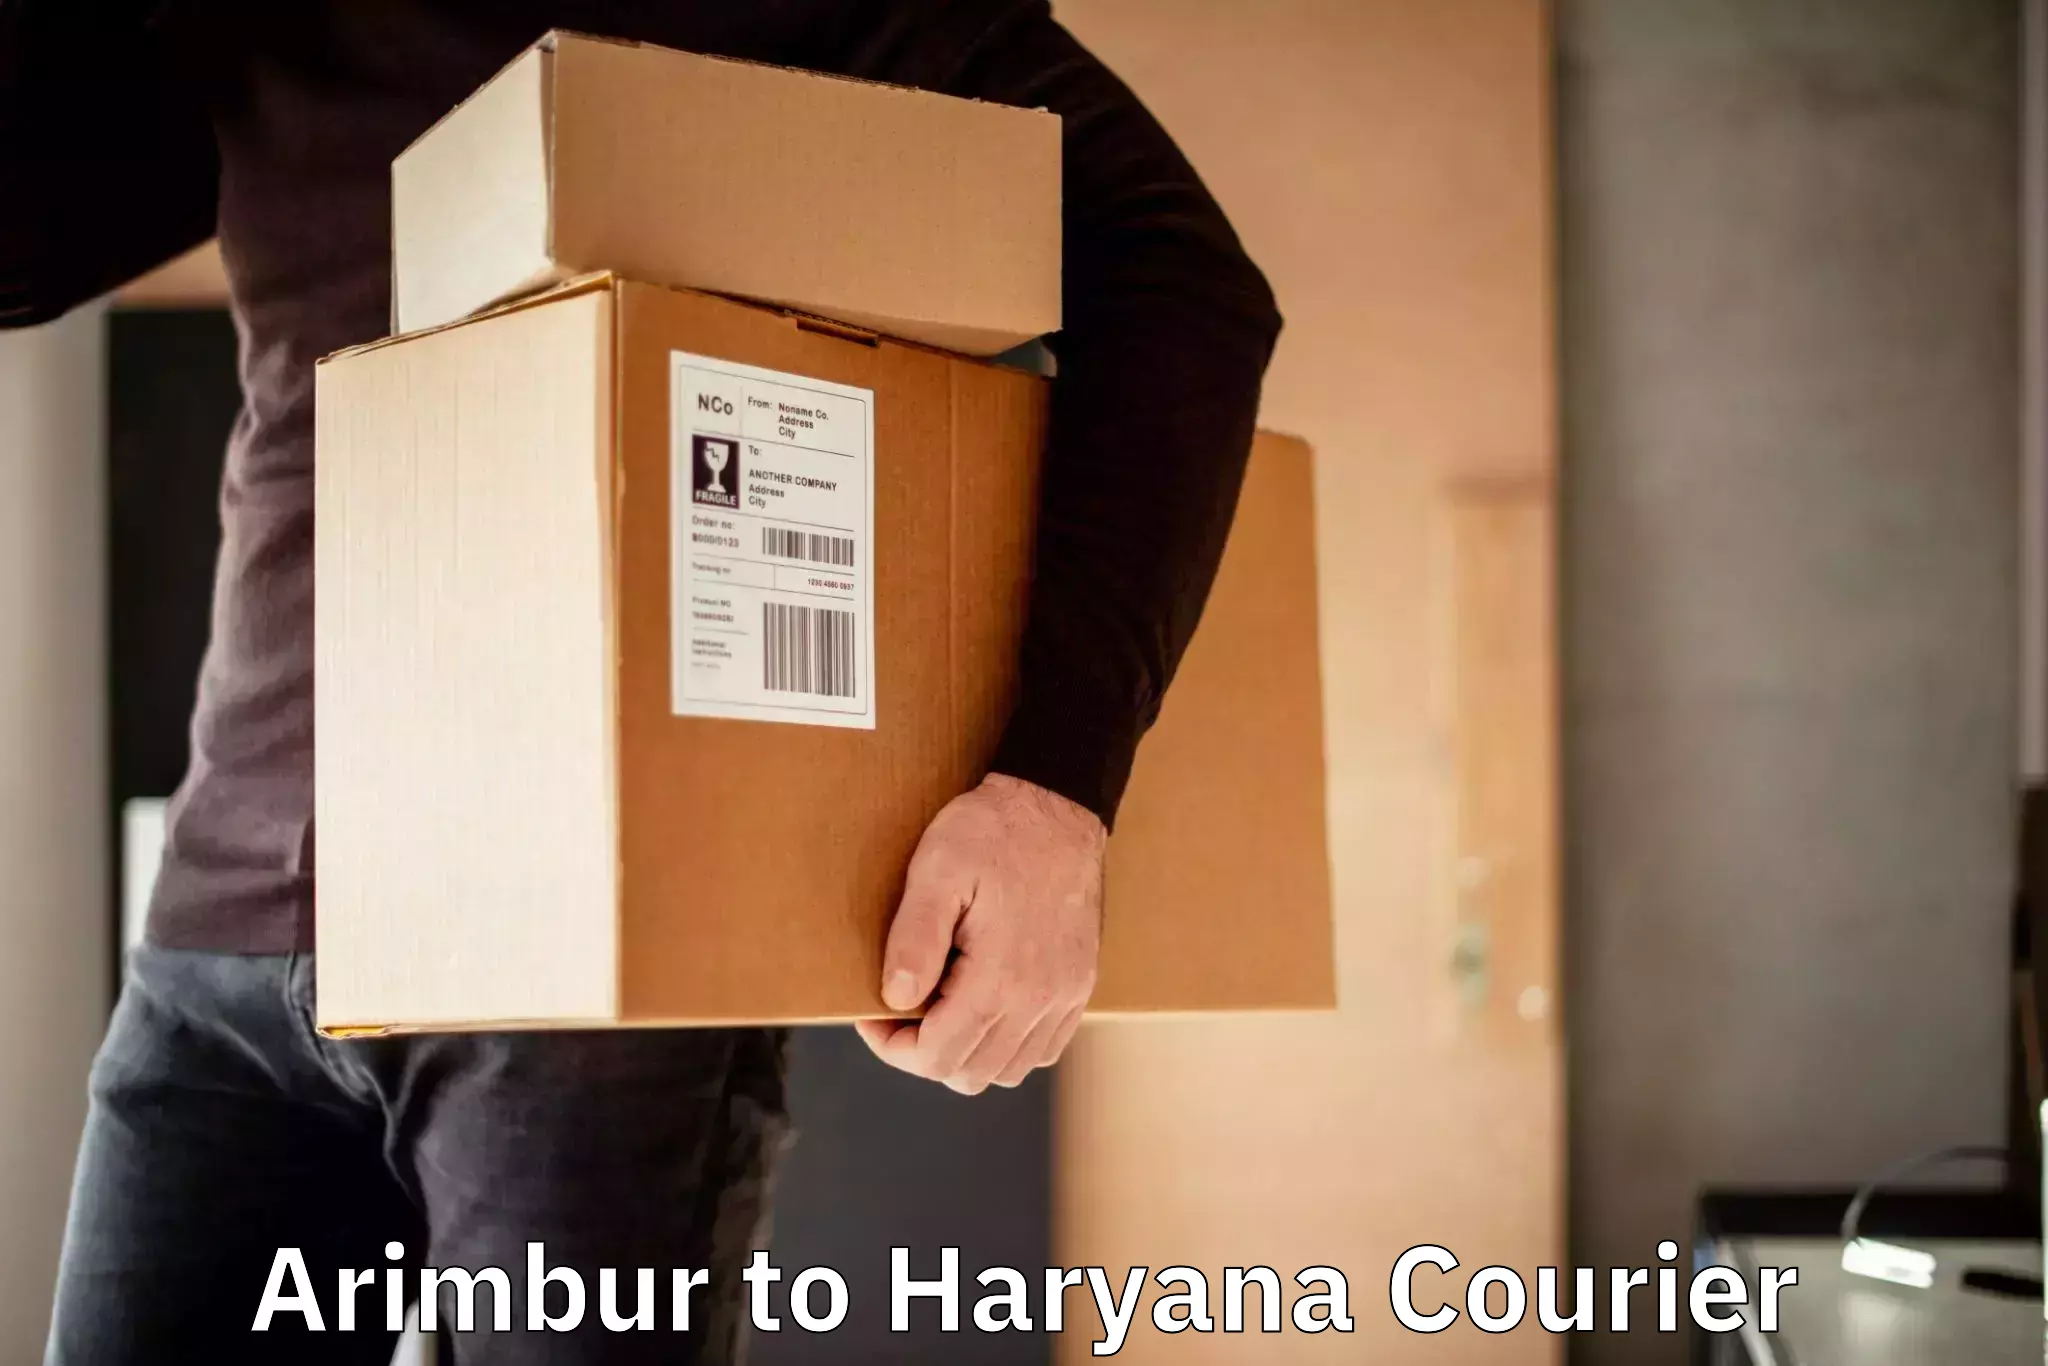 Reliable delivery network Arimbur to Panipat